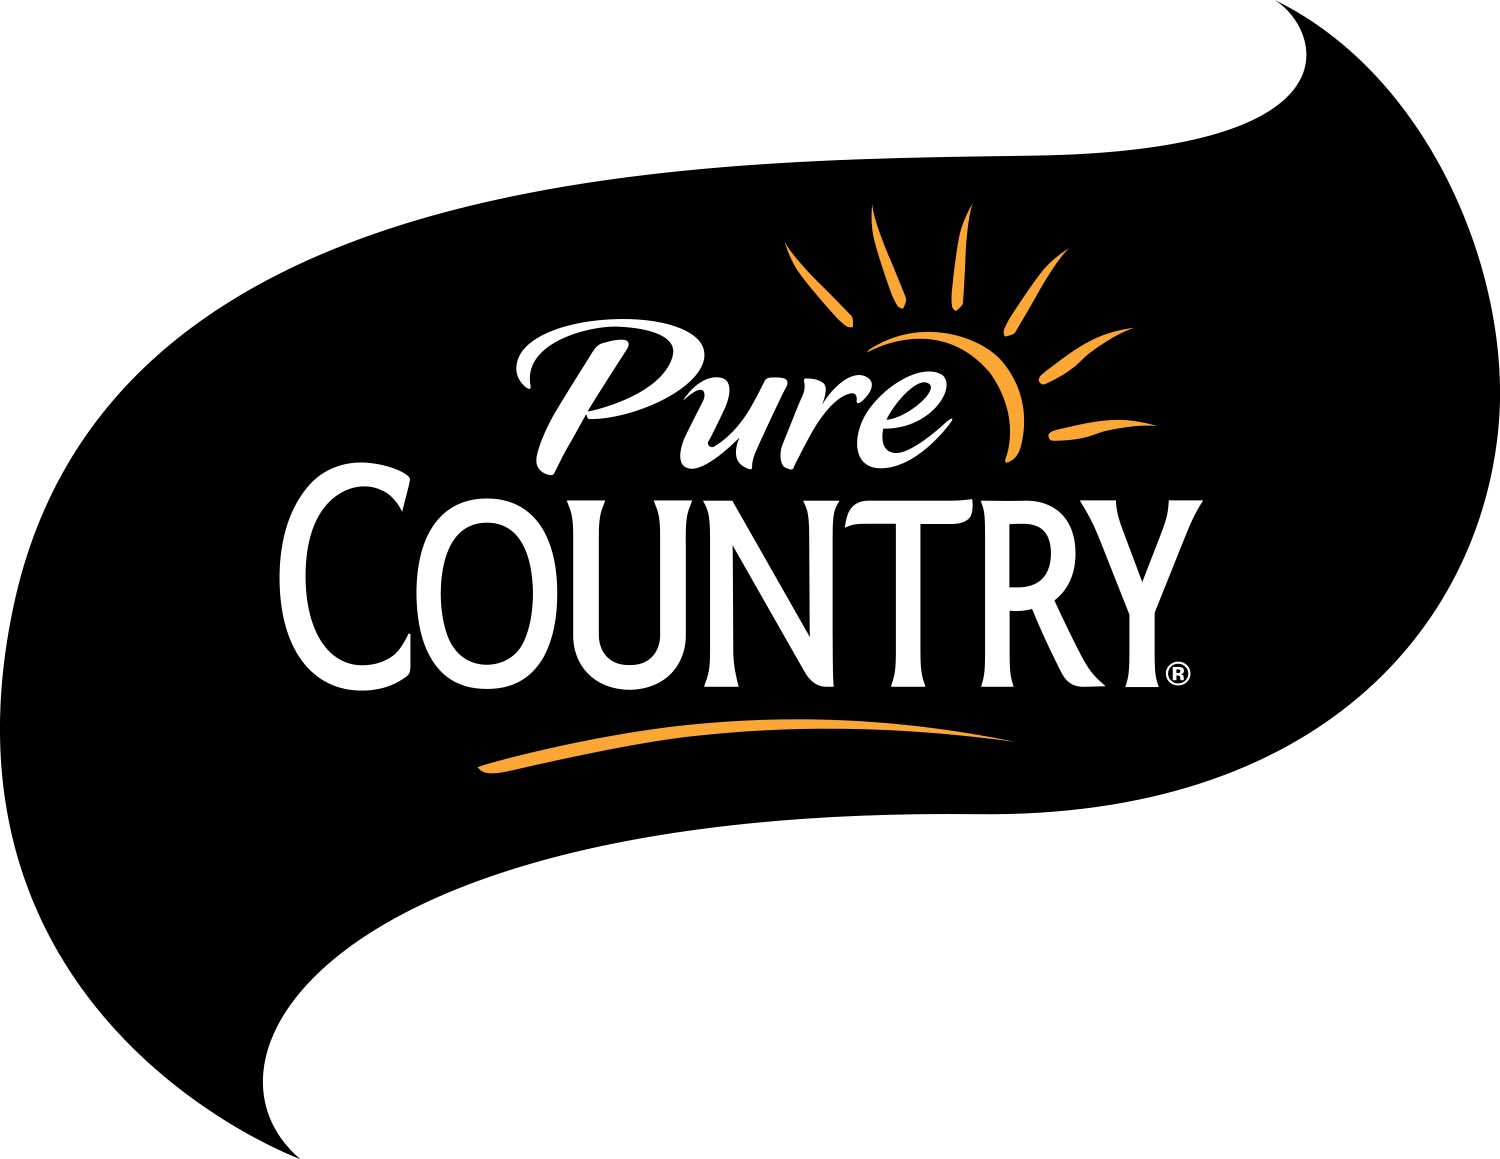 Pure Country Juices – Contact number – High Quality Logo